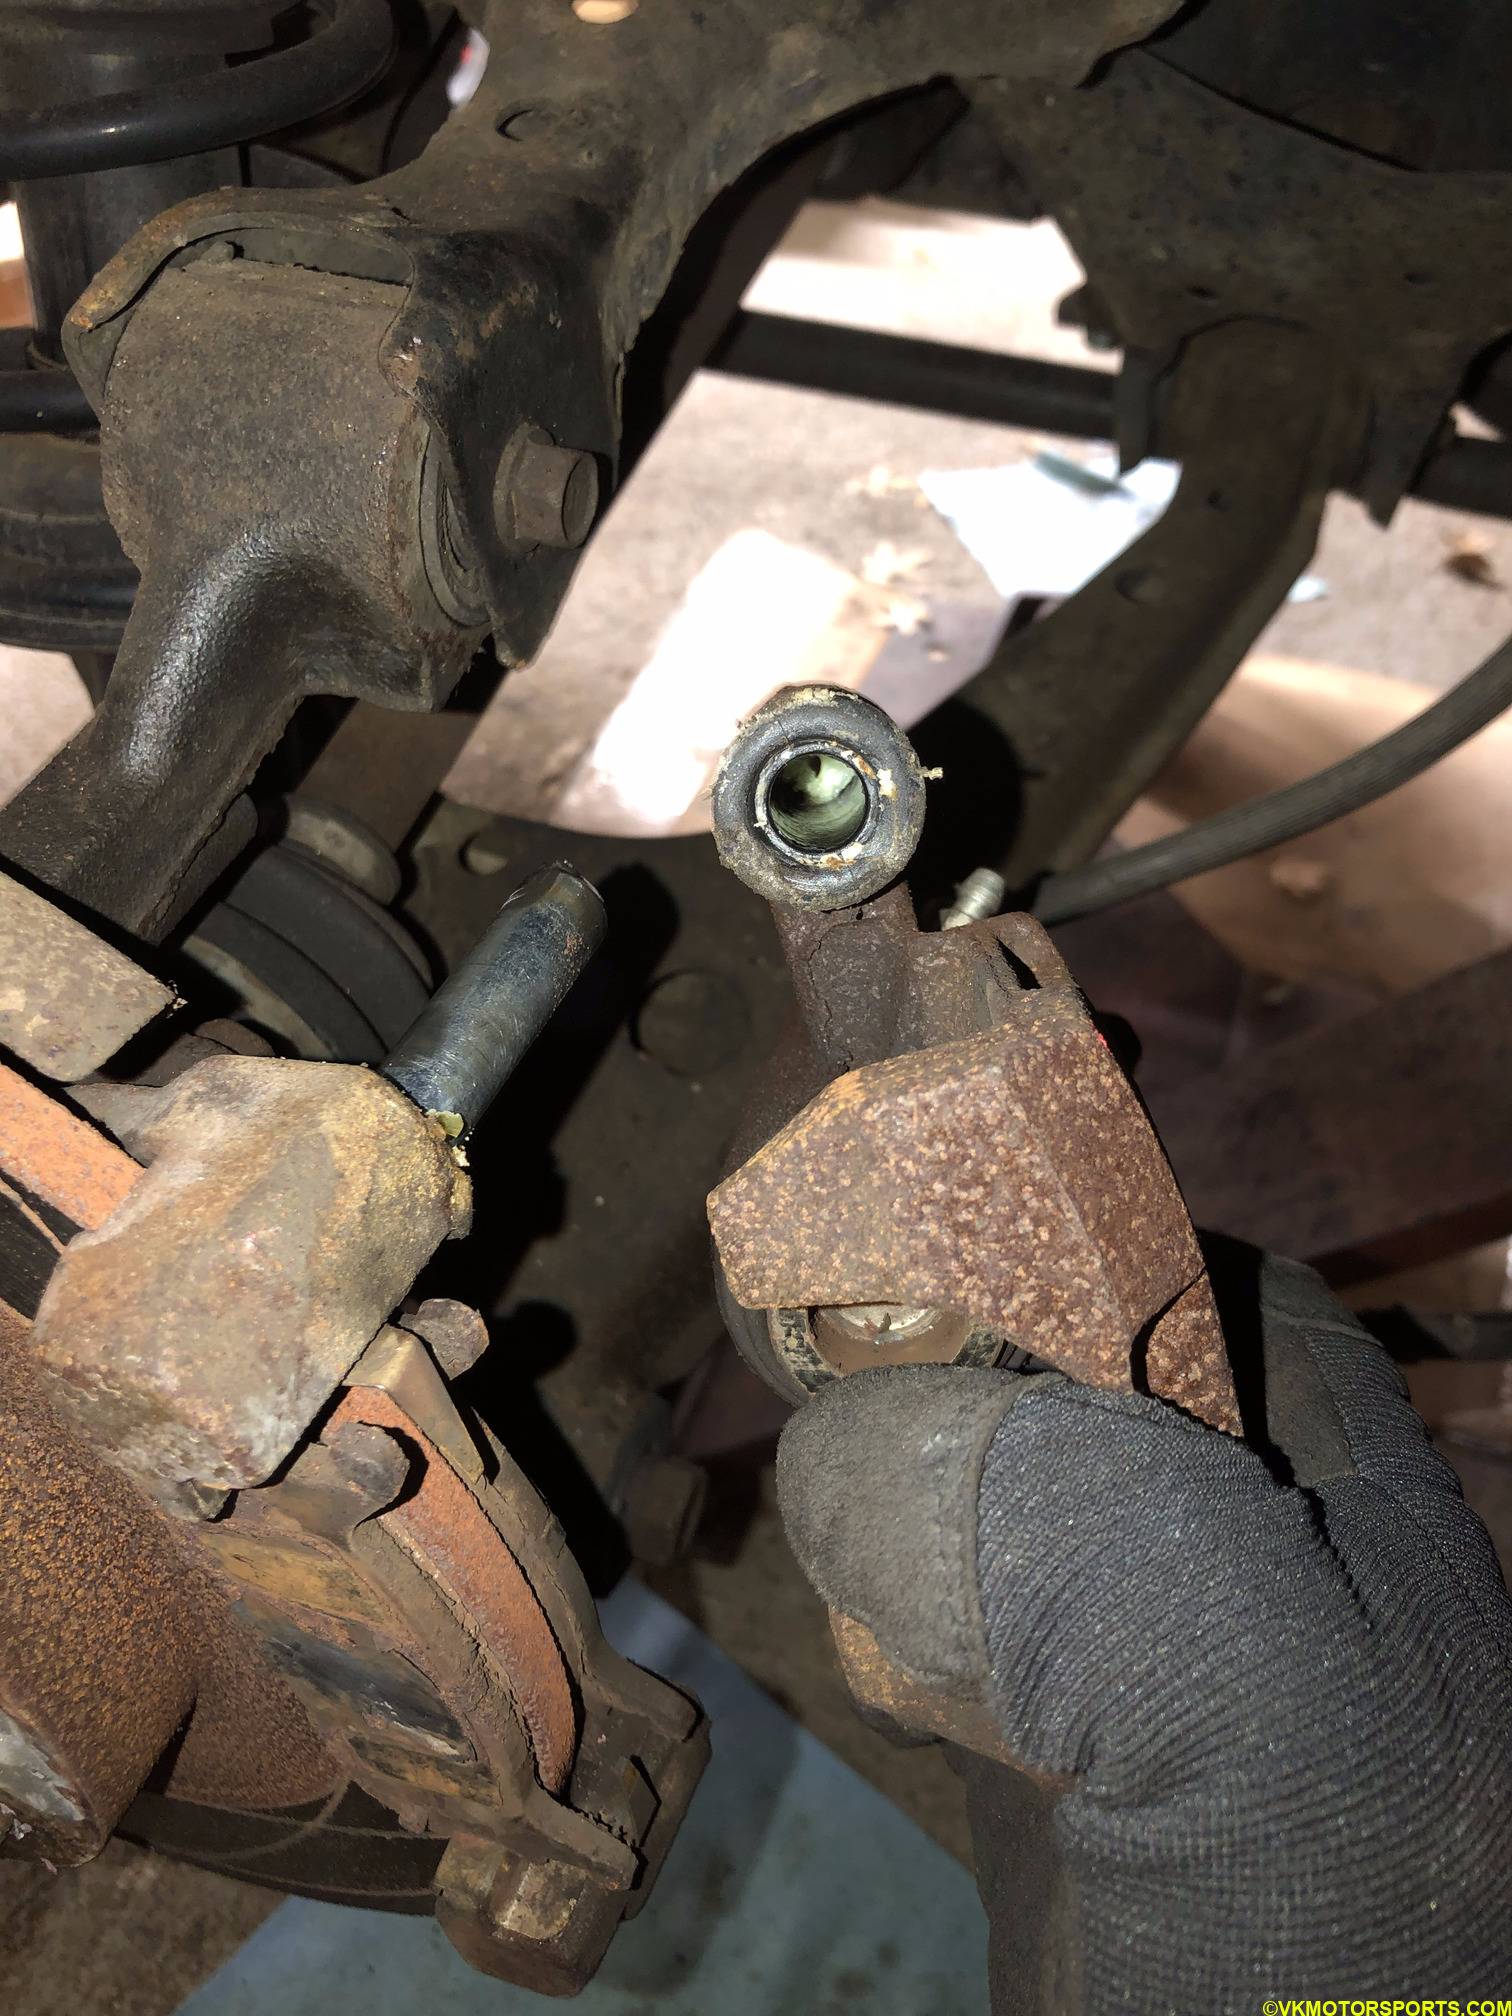 Caliper has been removed from the slide pin